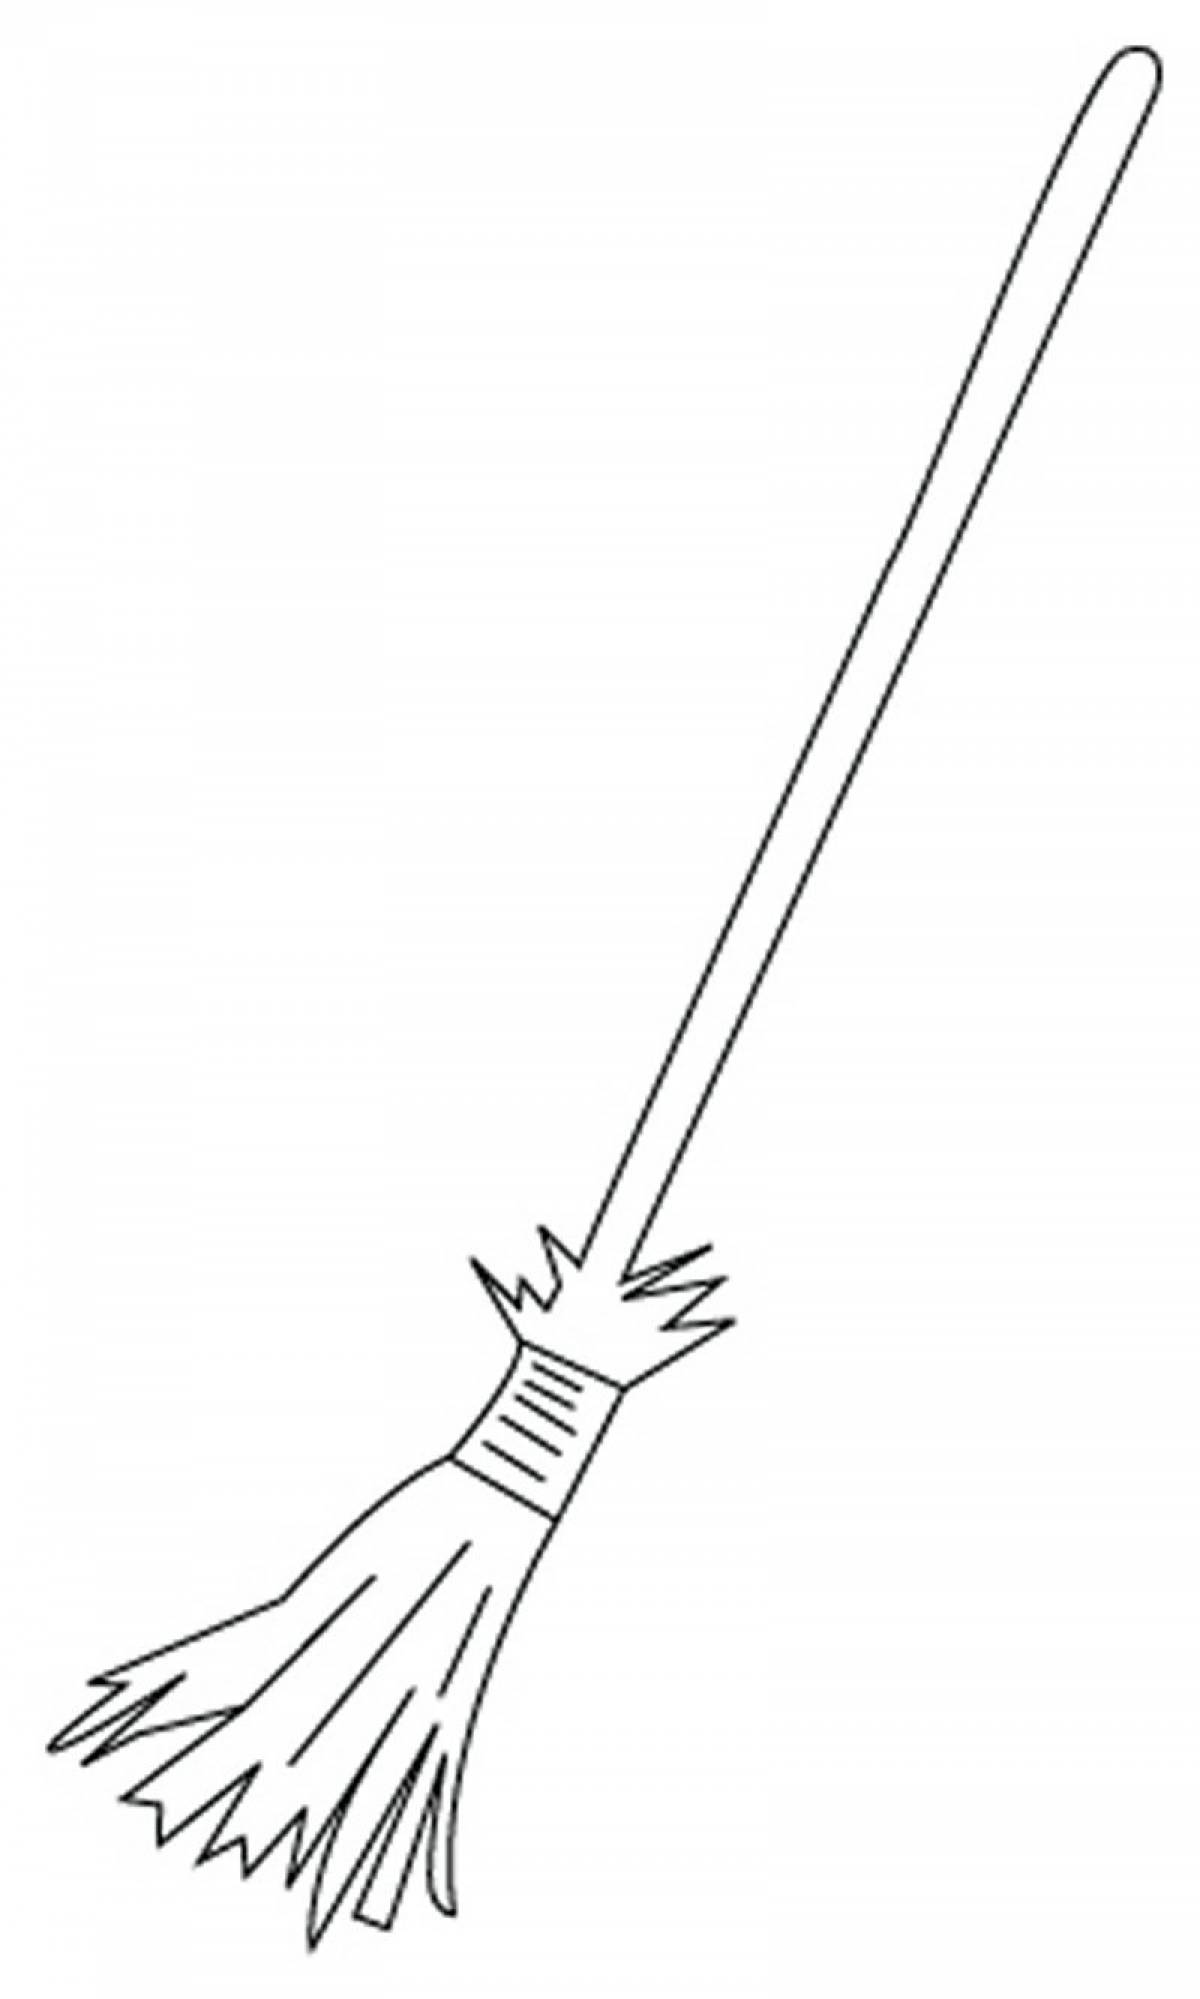 Broom coloring page